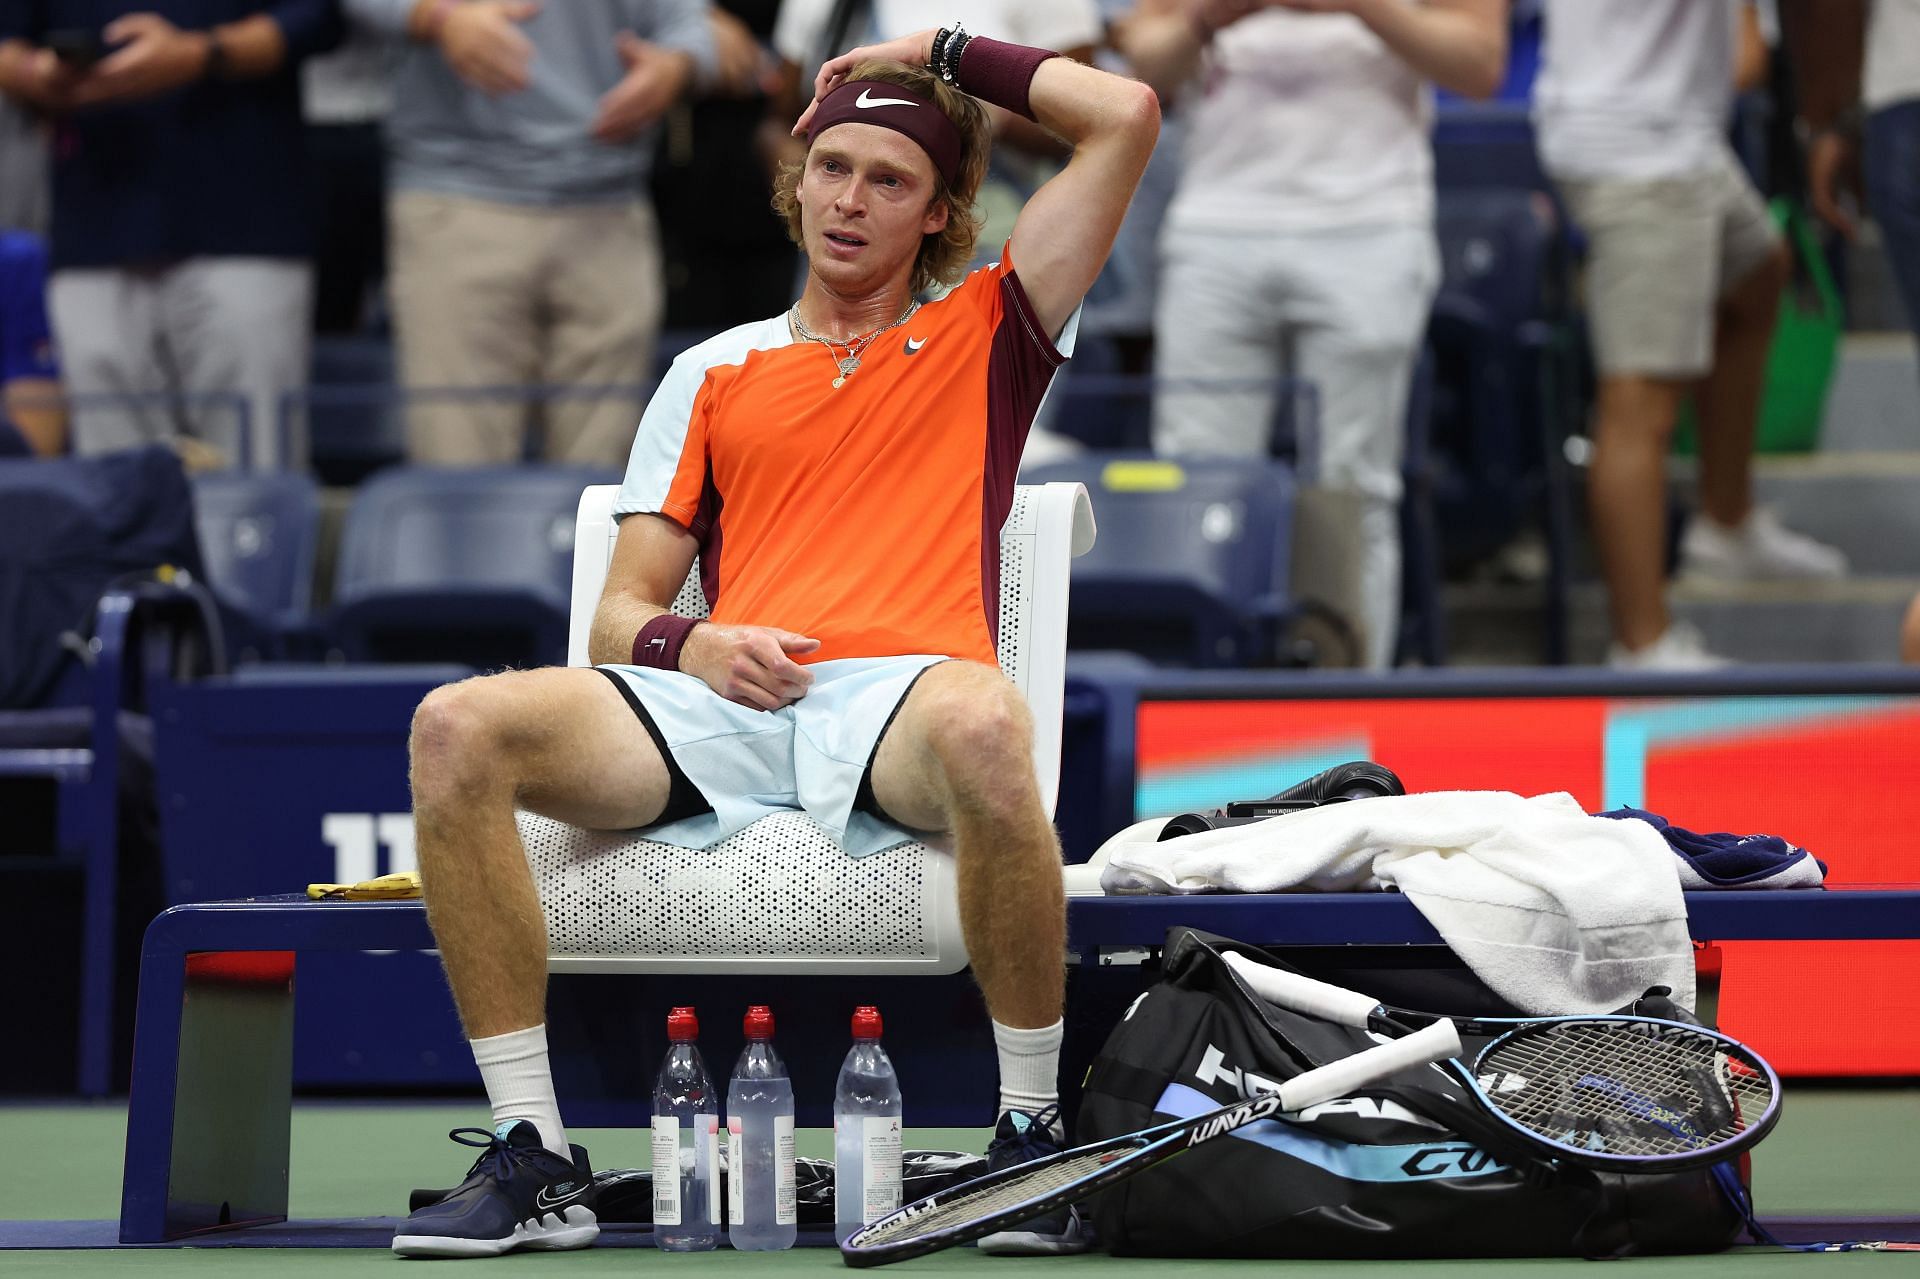 Andrey Rublev termed his emotional outbursts as one of his weaknesses